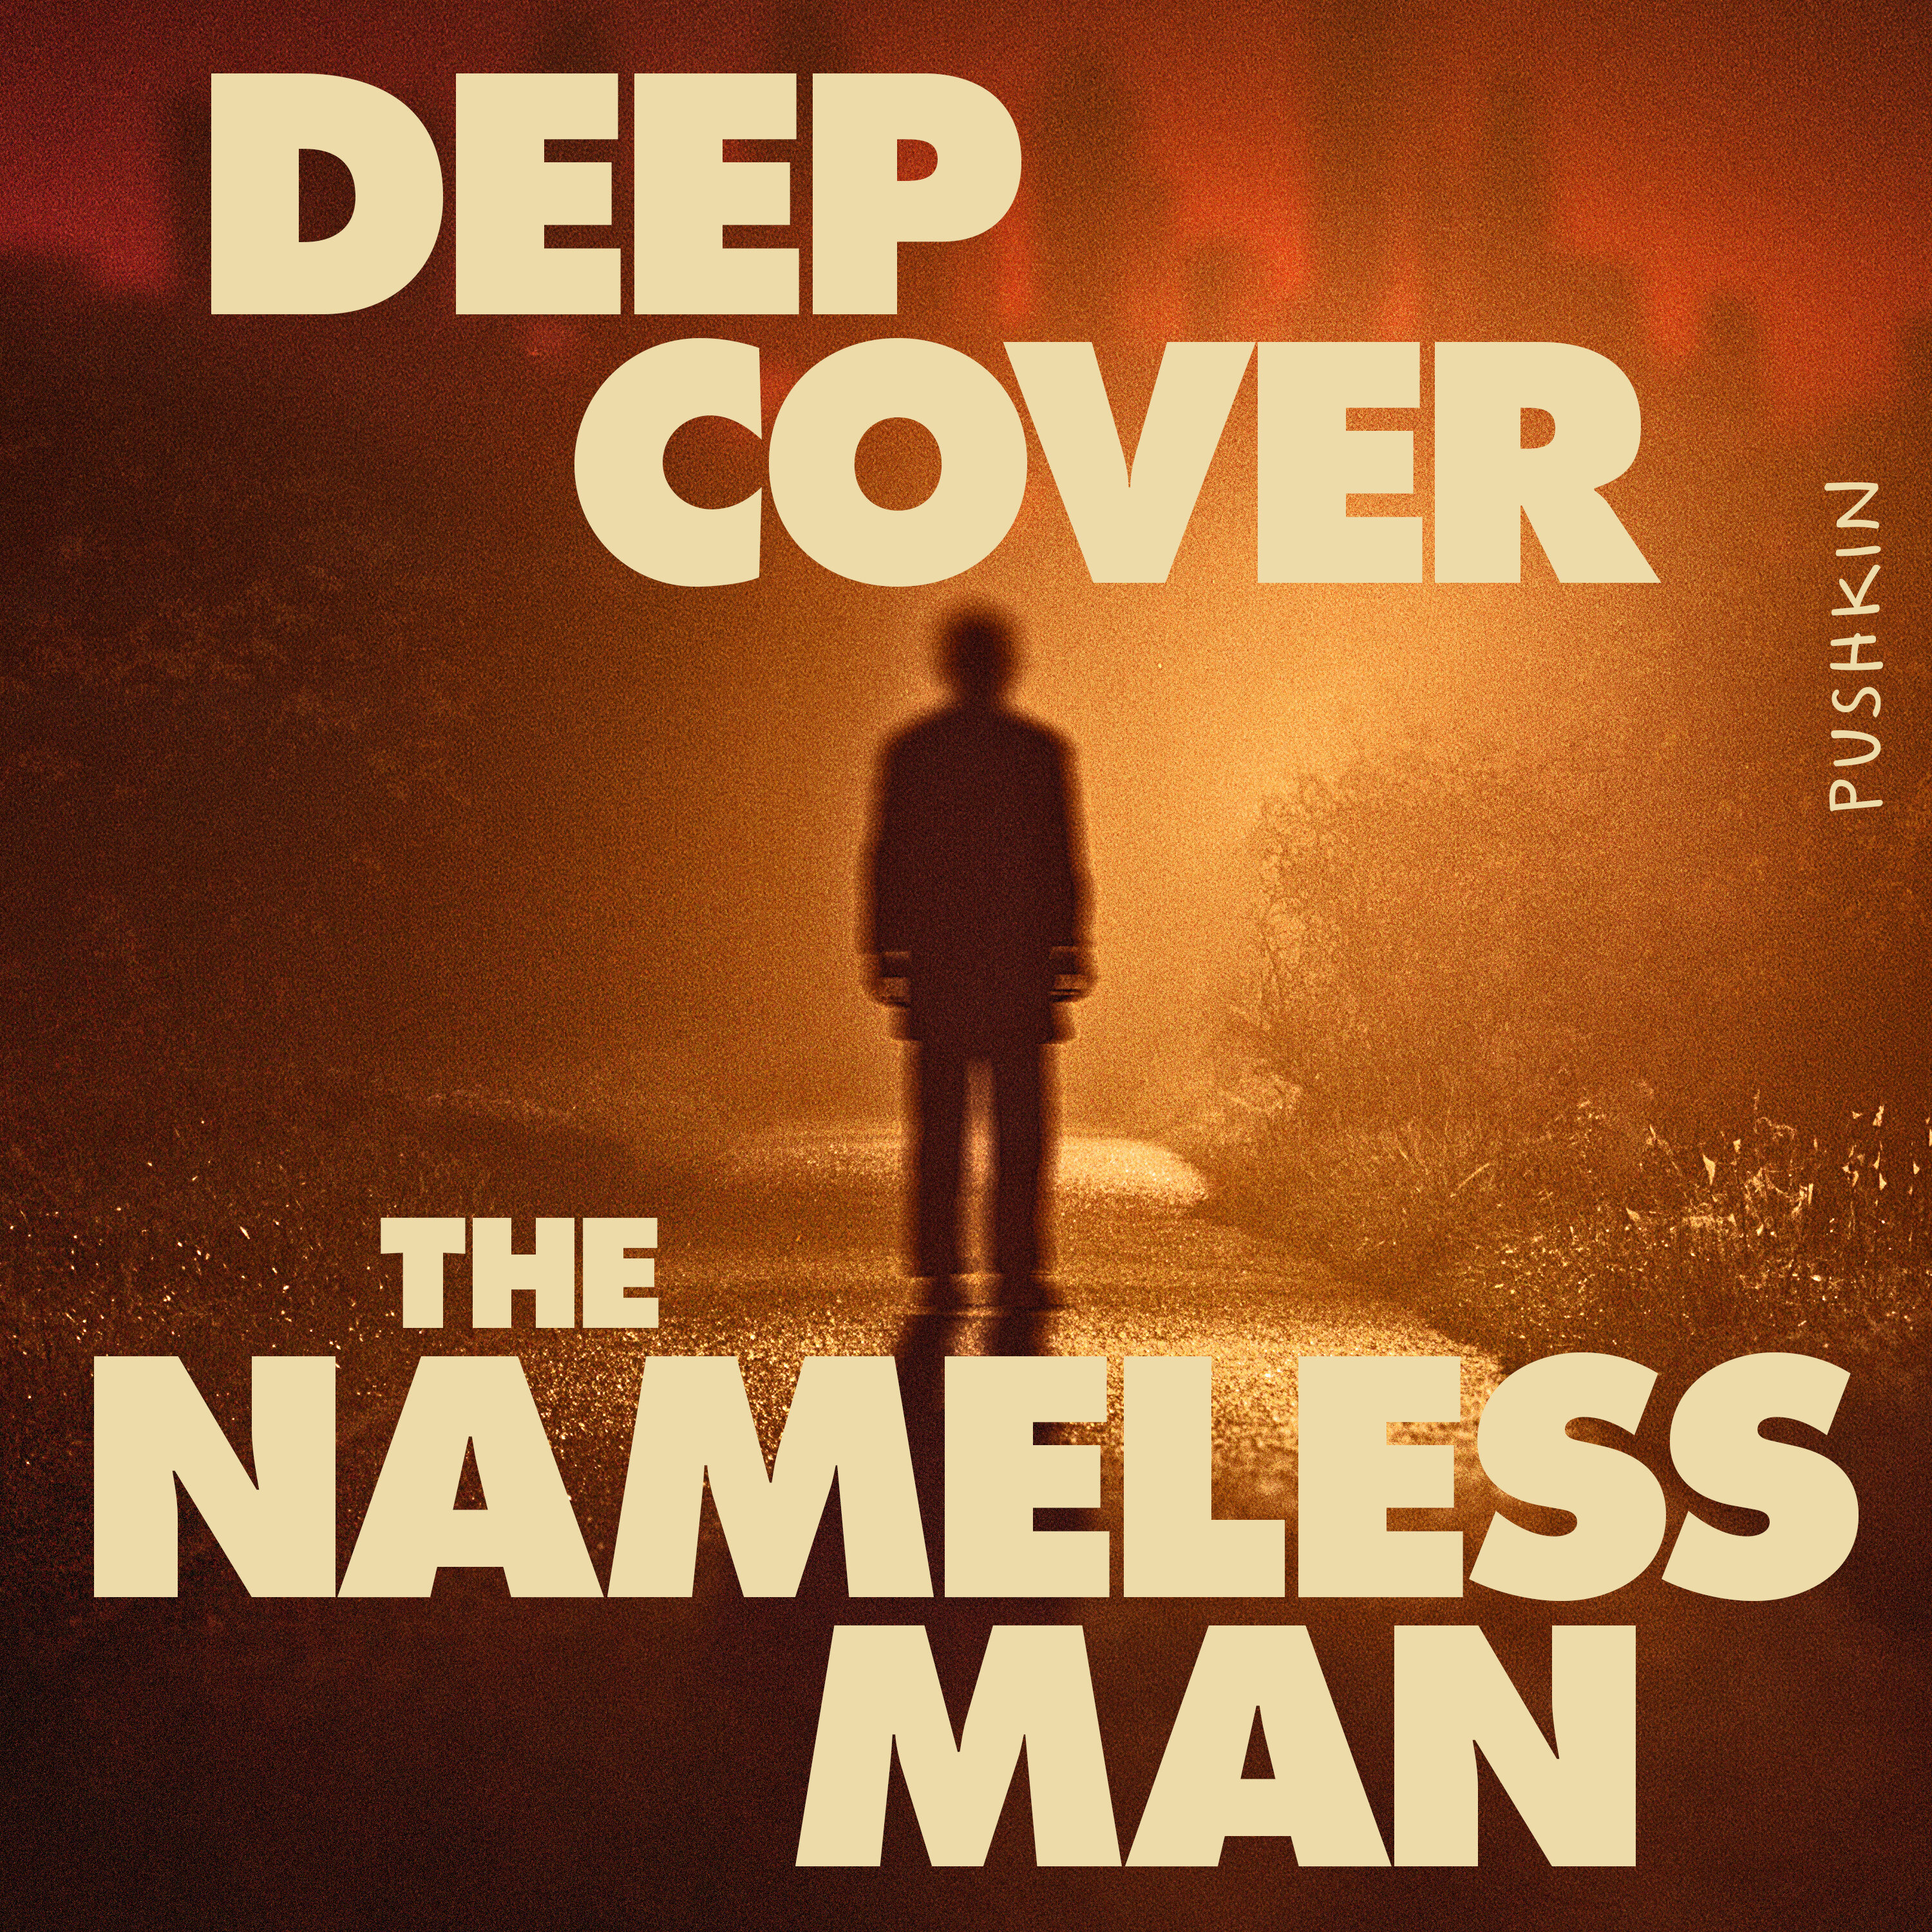 Deep Cover: The Nameless Man by Pushkin Industries